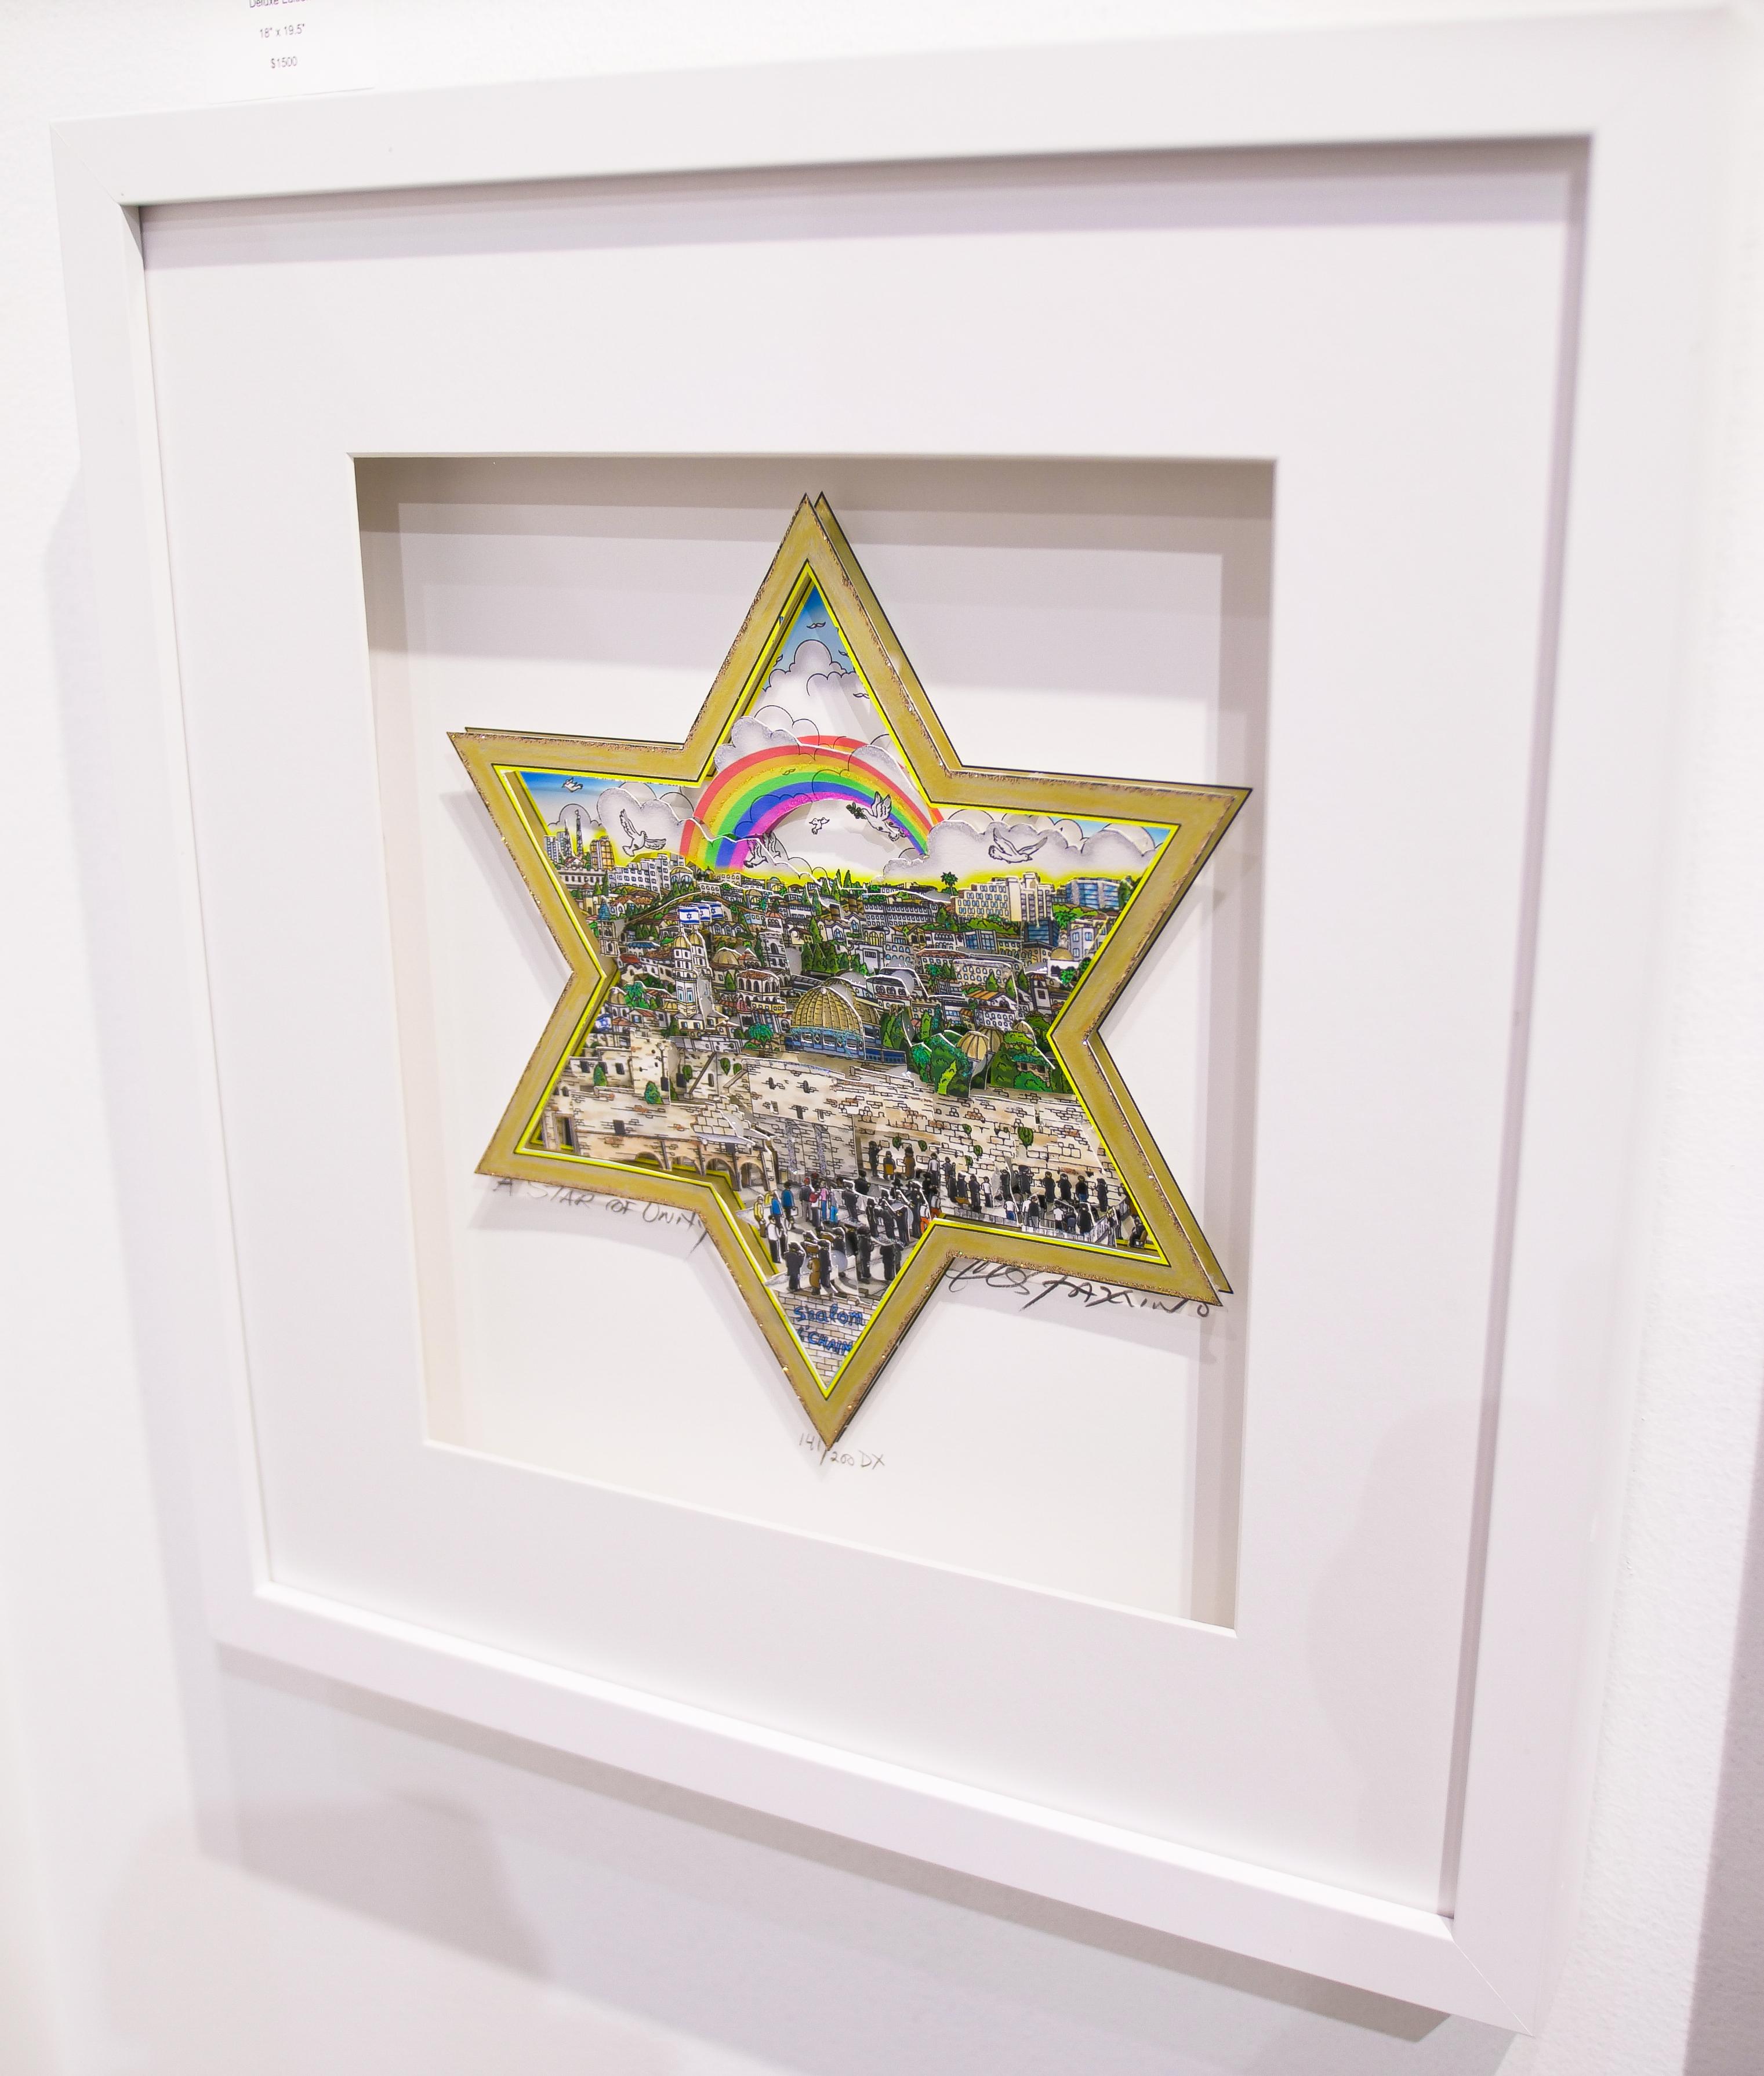 Another Beautiful Judea themed limited edition by 3D Pop Artist Charles Fazzino.
Each piece is hand cut, hand glued and hand embellished with glitter and Swarovski Crystals.
Hand signed by Charles Fazzino, hand numbered deluxe edition (Three layers)